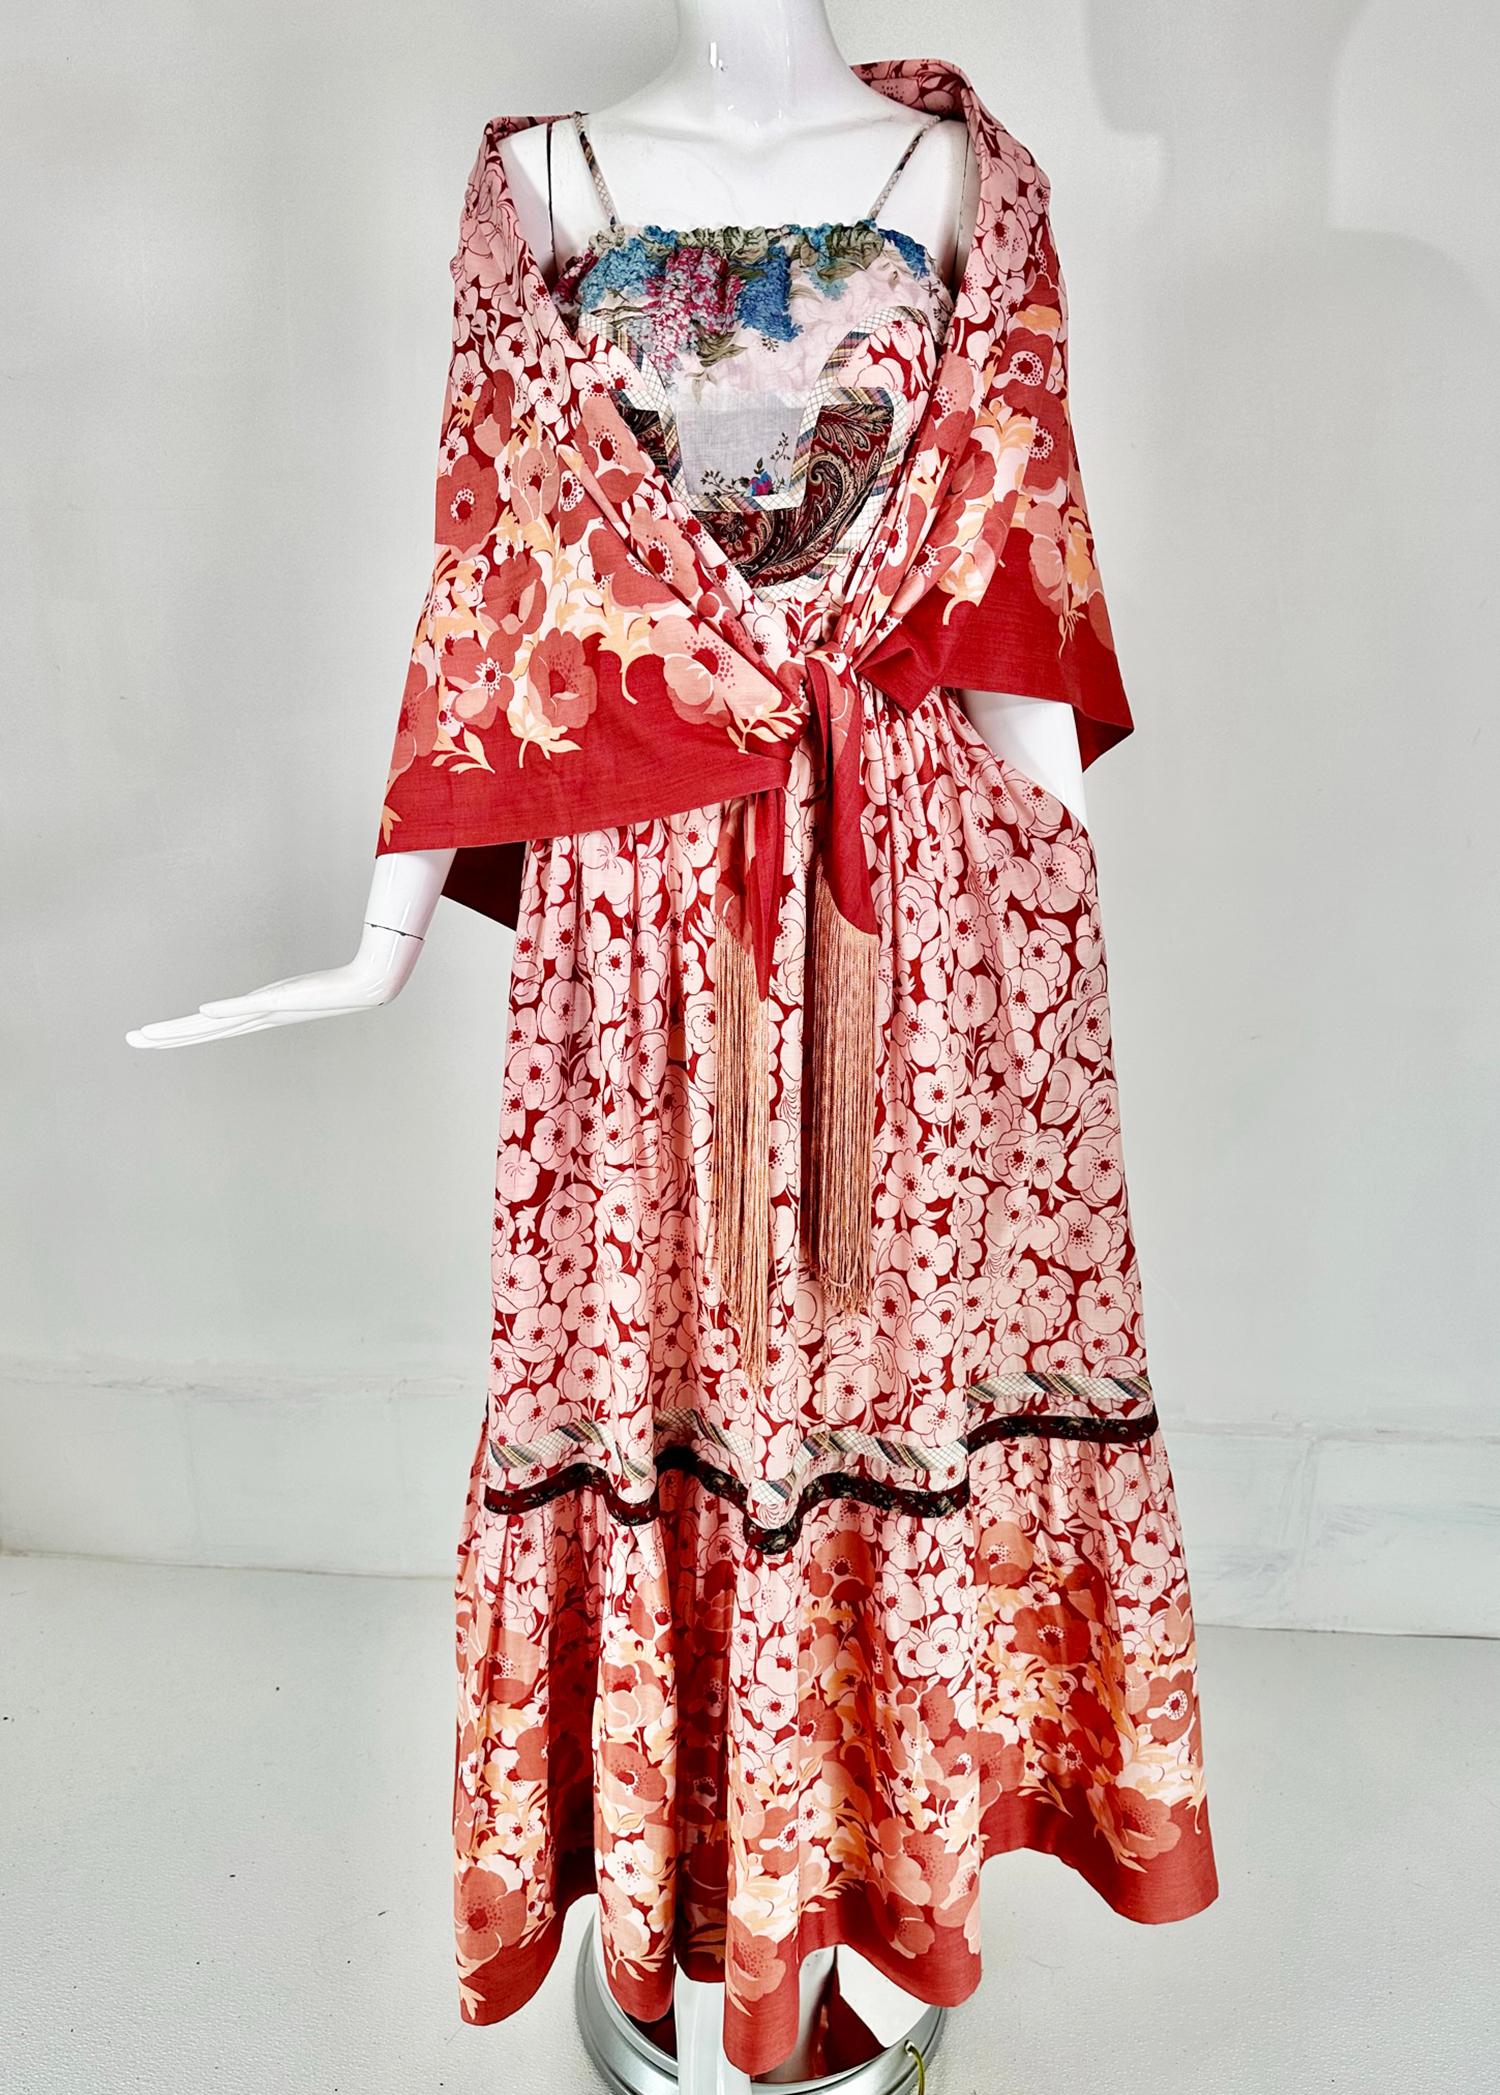 Koos van den Akker 1970s floral cotton patchwork peasant maxi dress & matching fringe shawl. A beautiful example of Koos early work, using a bold cotton floral border print in shades of brick red. The pull on dress has narrow spaghetti straps, the